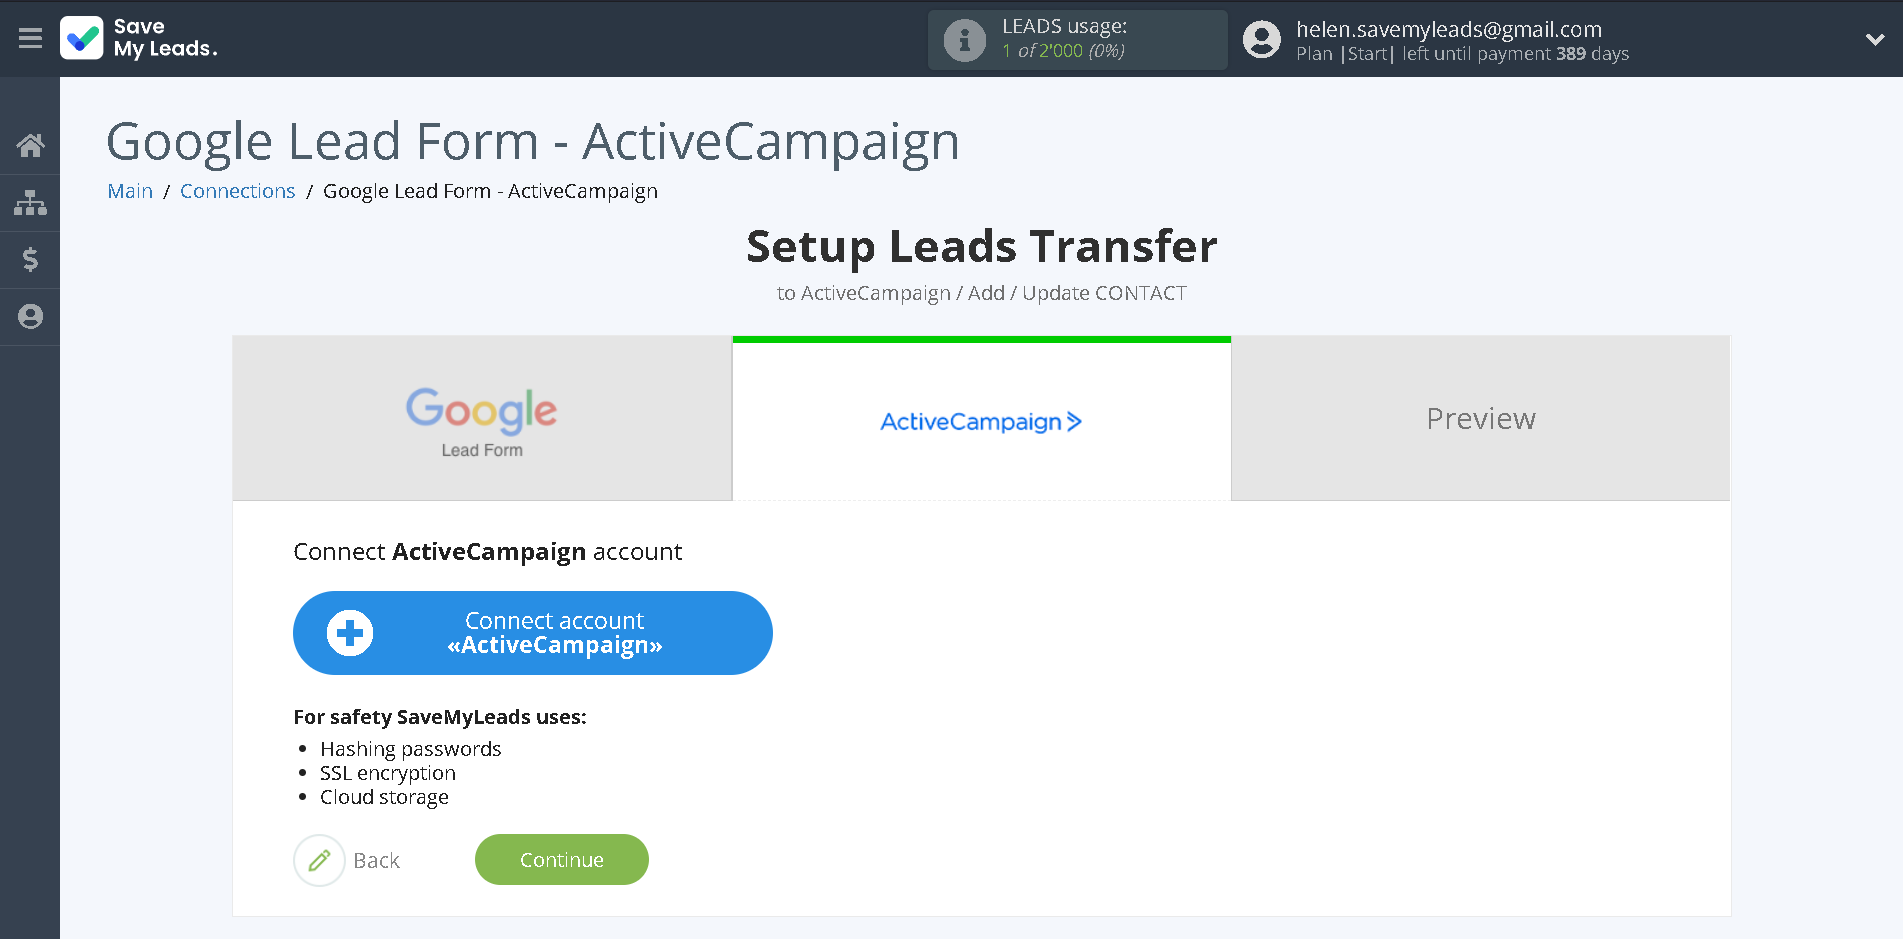 How to Connect Google Lead Form with ActiveCampaign Create Contacts | Data Destination account connection